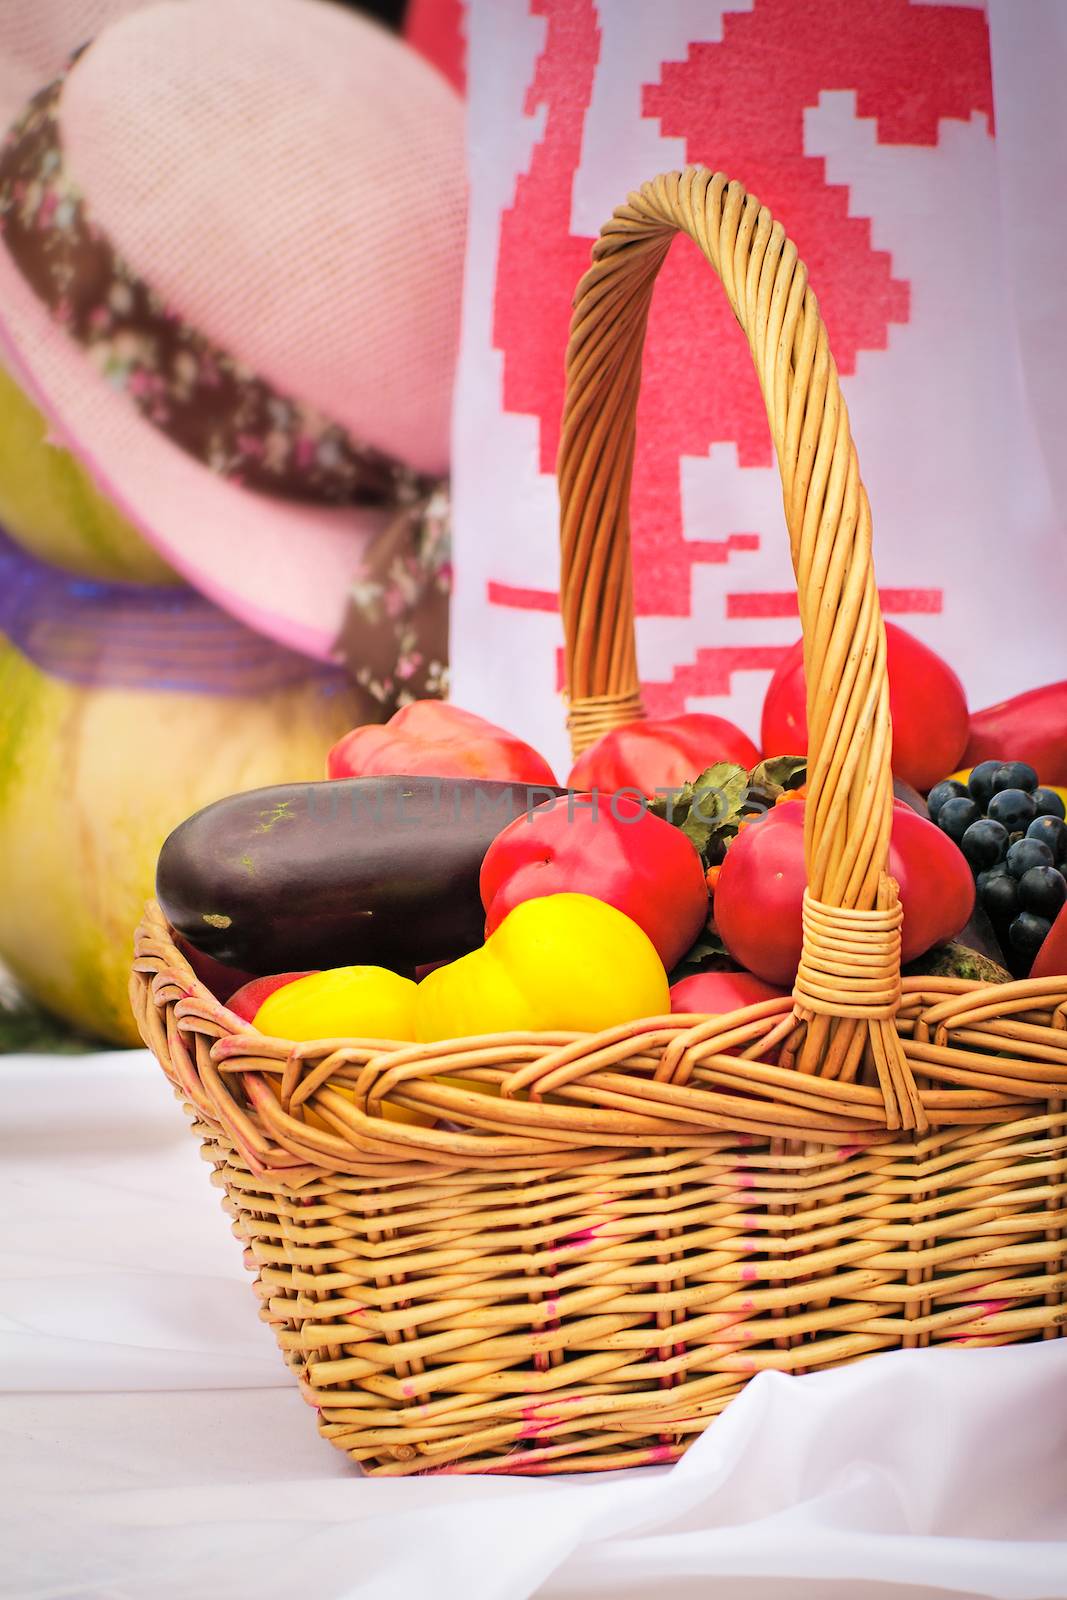 On a white towel there is a beautiful basket with tomatoes, eggplants, pepper, grapes for sale at fair.